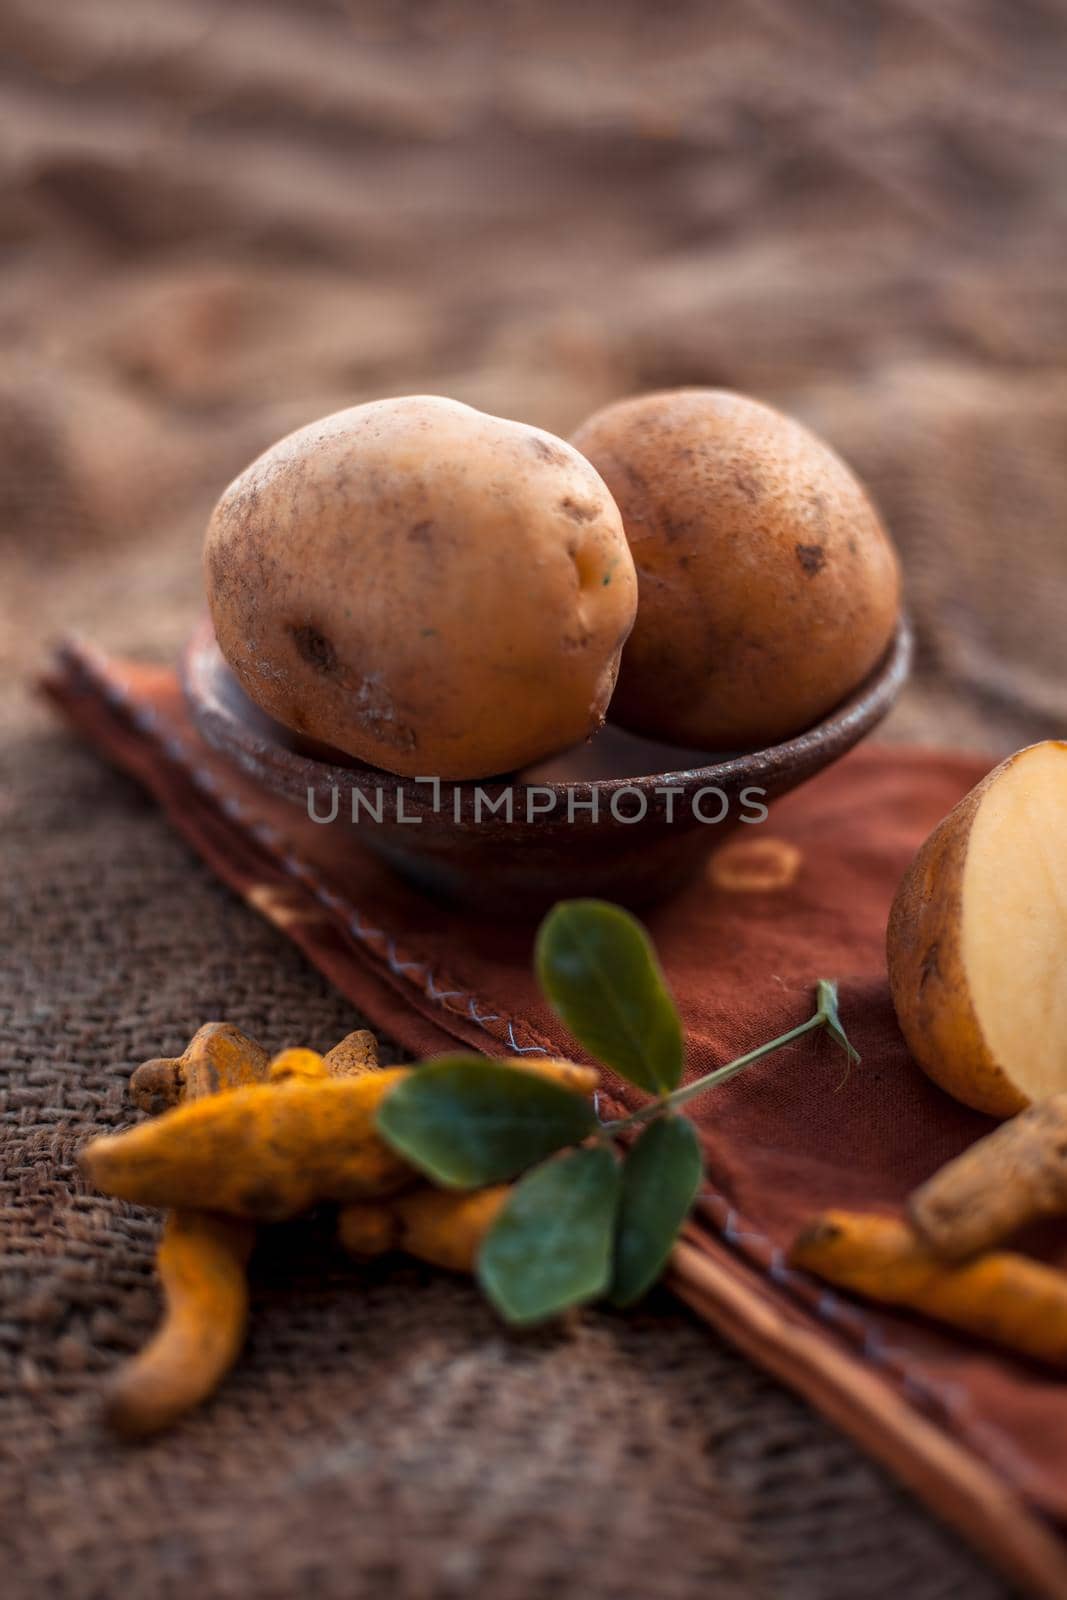 Potato face mask consisting of grated potato and some turmeric powder or haldi in a glass bowl on jute bags surface to brighten the skin, kills bacteria and germs.